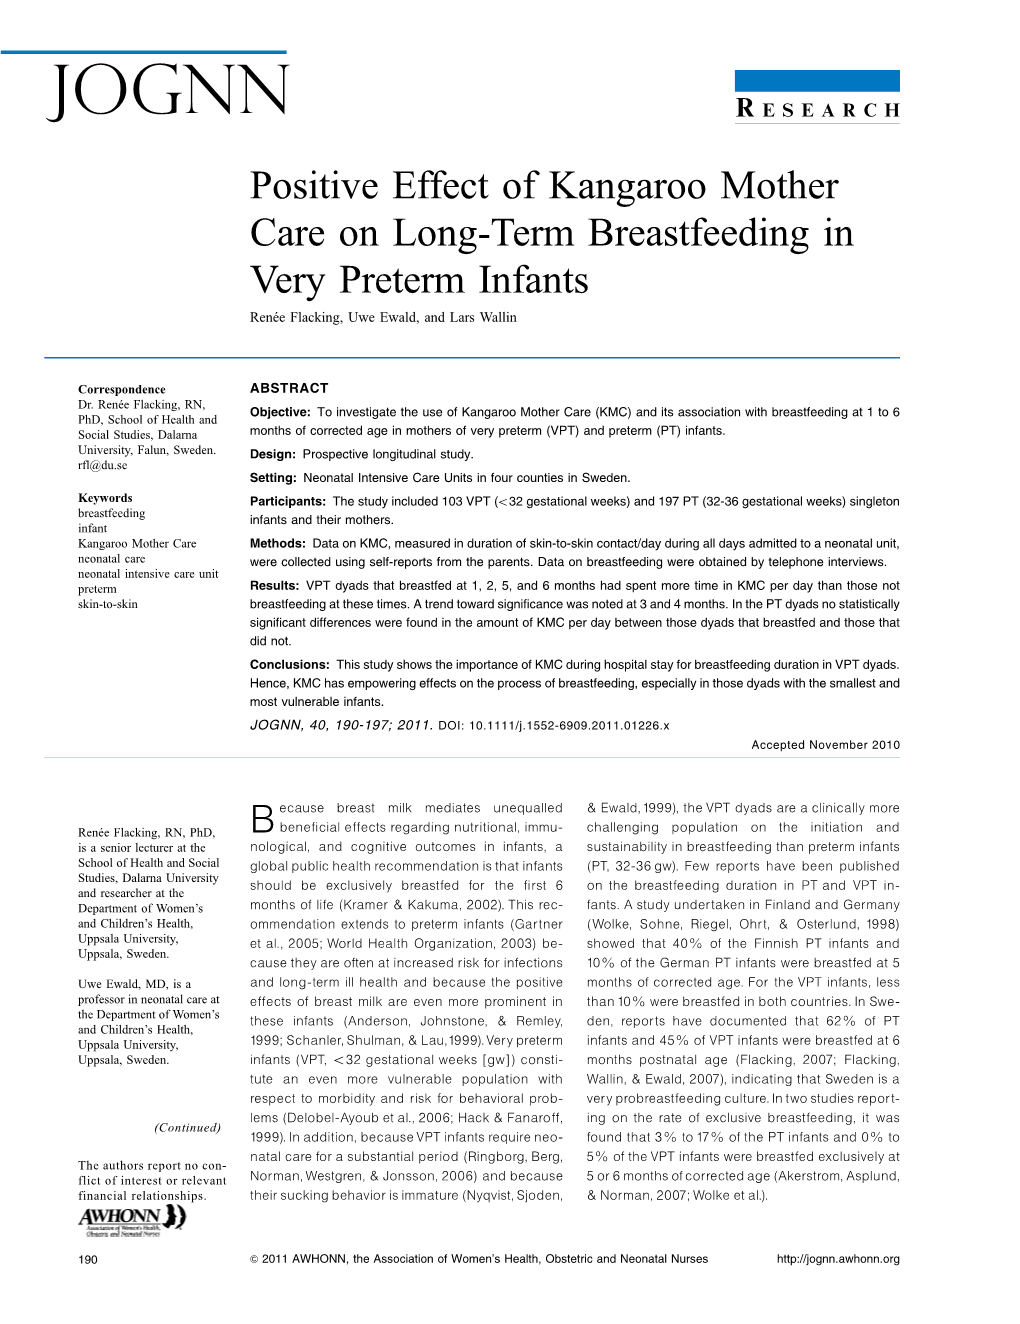 Positive Effect of Kangaroo Mother Care on Longterm Breastfeeding In